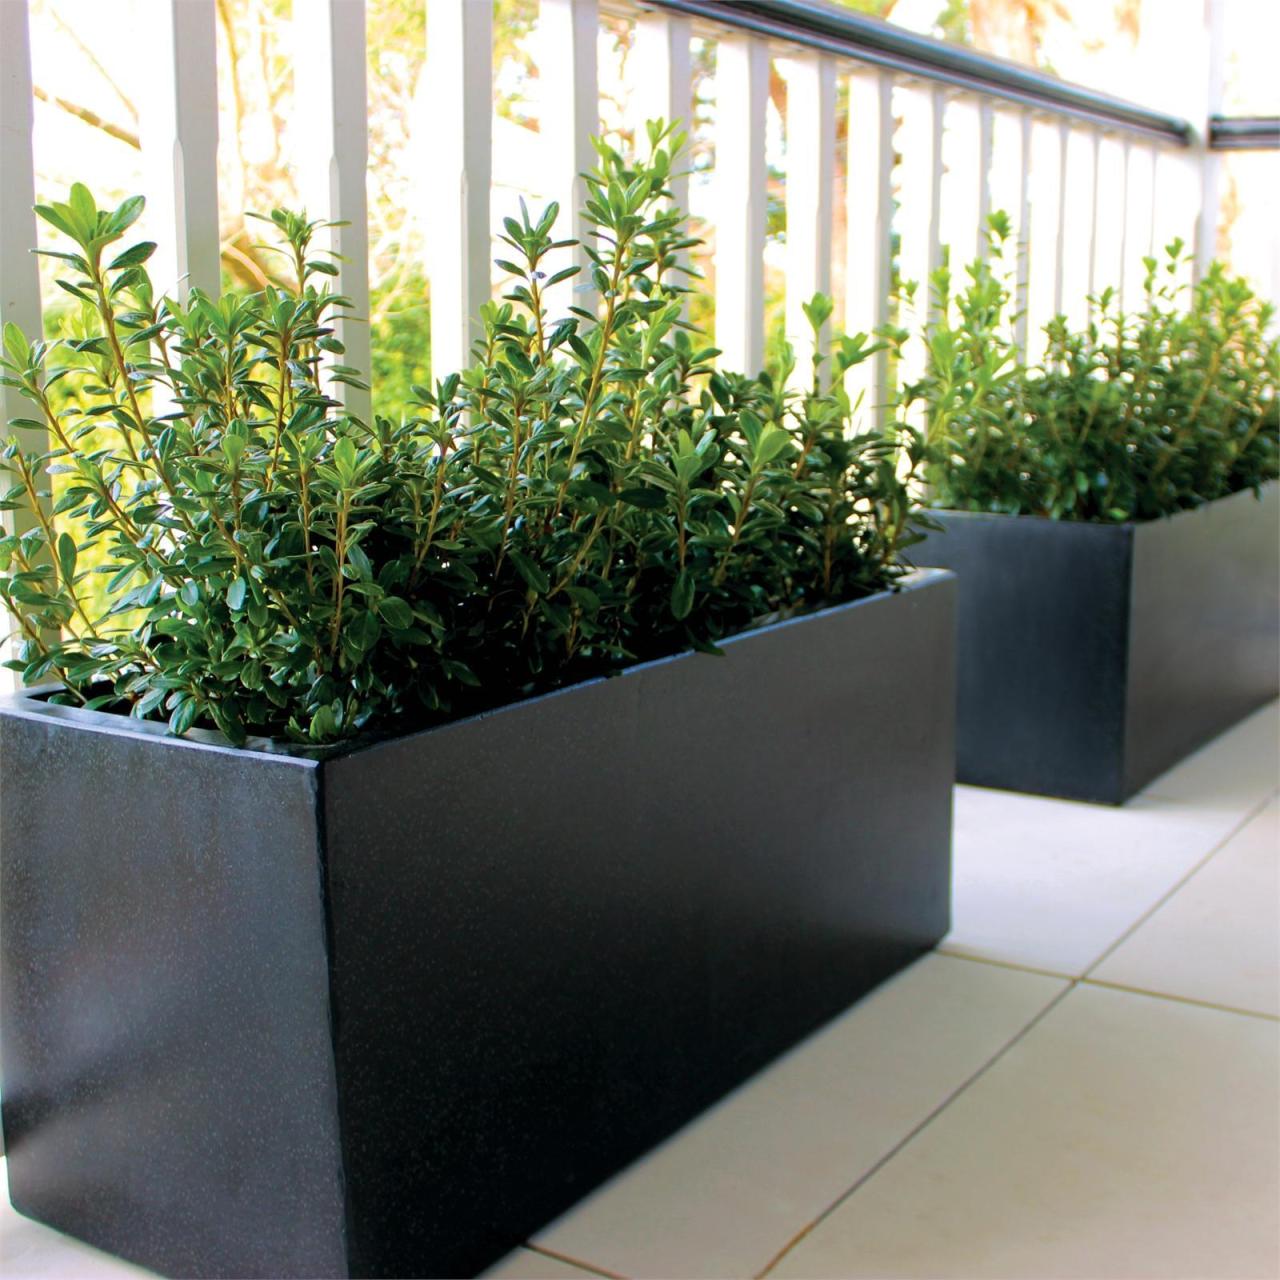 Hanging Plants Indoor | Ceramic Pots at Bunnings: Elevate Your Home Decor and Outdoor Spaces